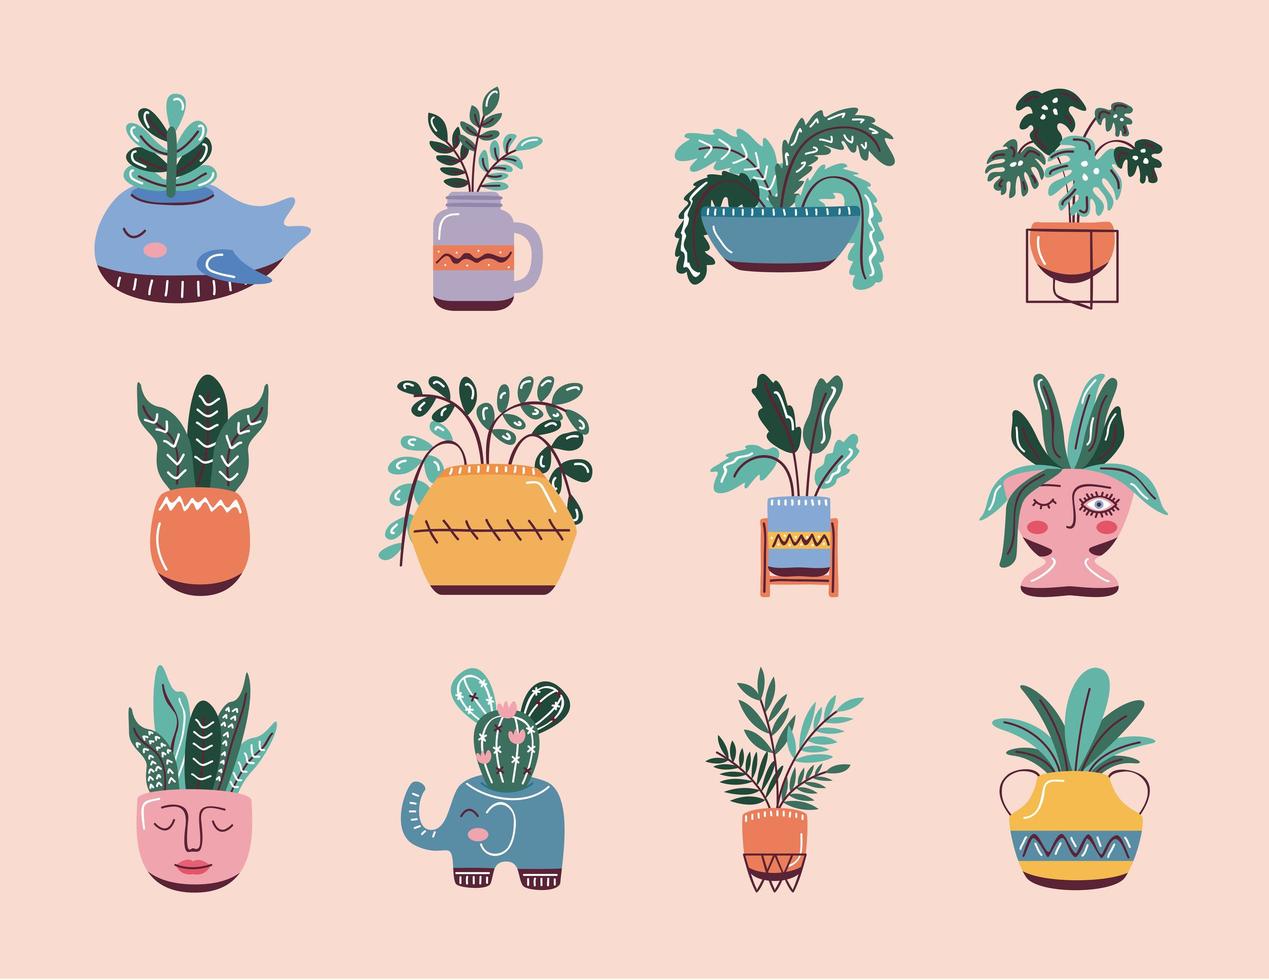 icons of house plants scandinavian style vector